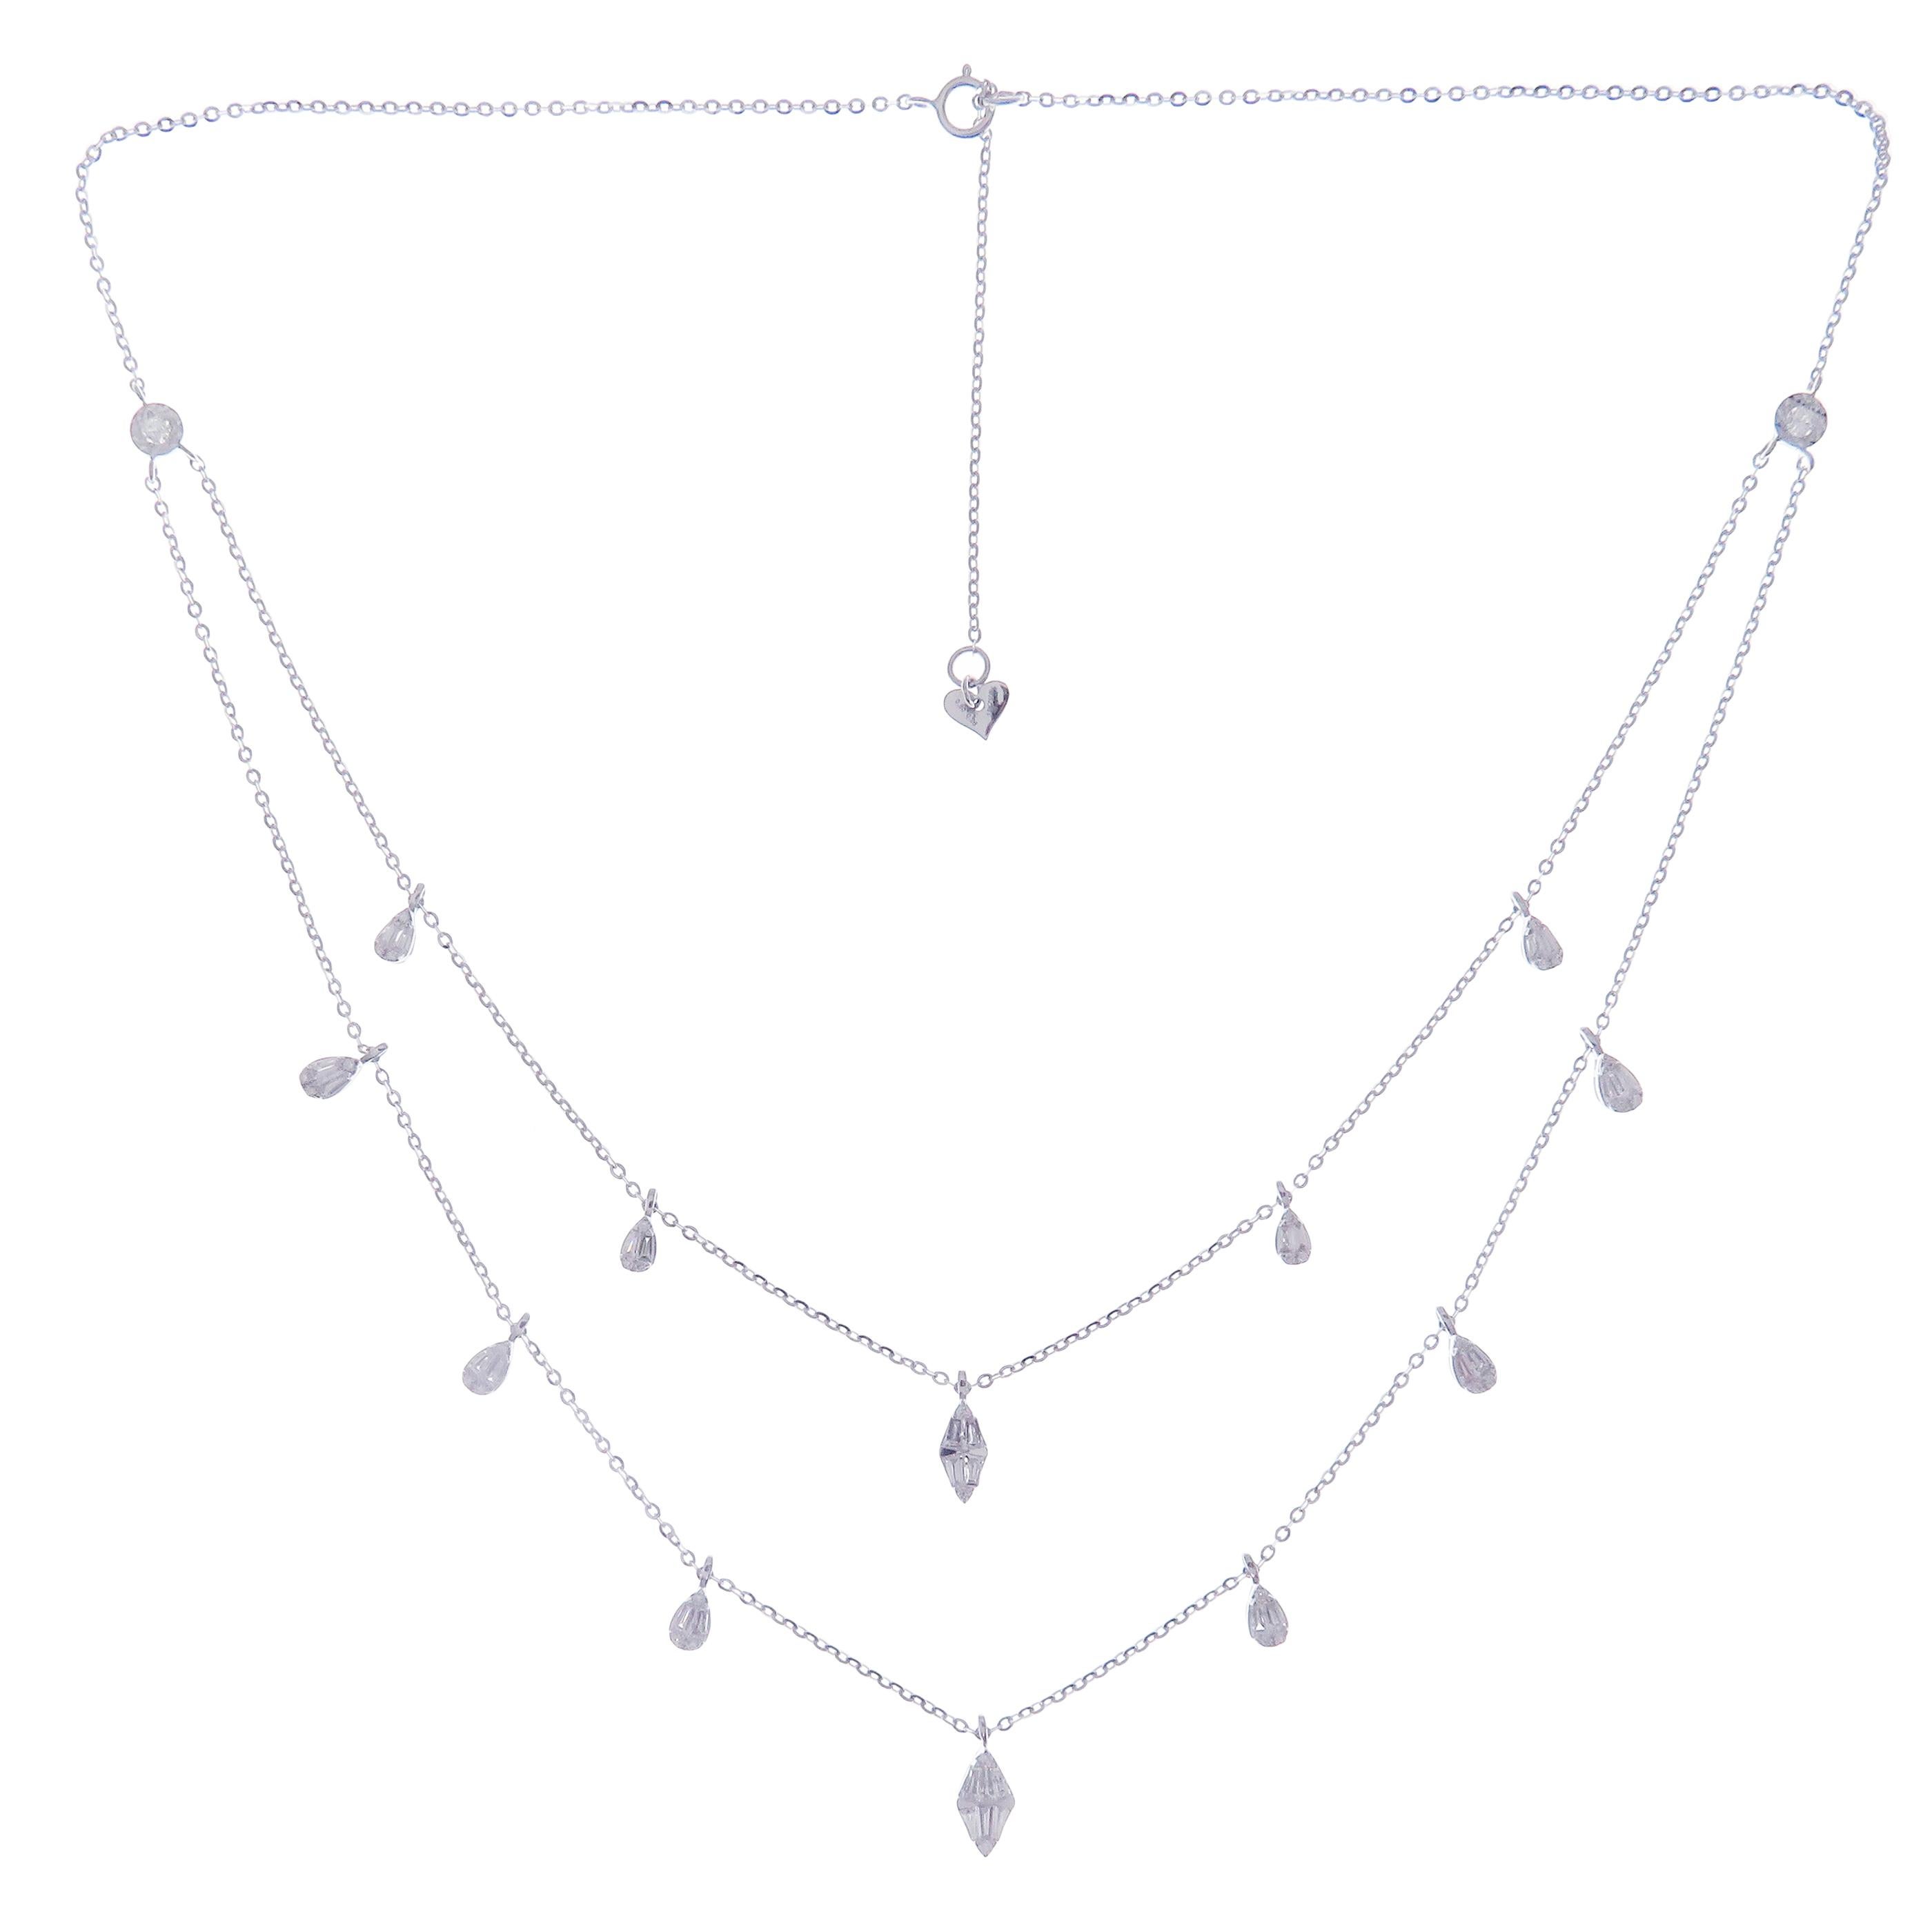 This delicate double-strand necklace is crafted in 18-karat white gold, weighing approximately 1.06 total carats of SI-H Quality white diamonds. 
18-karat yellow gold and rose gold are also available upon request.

Necklace is 16